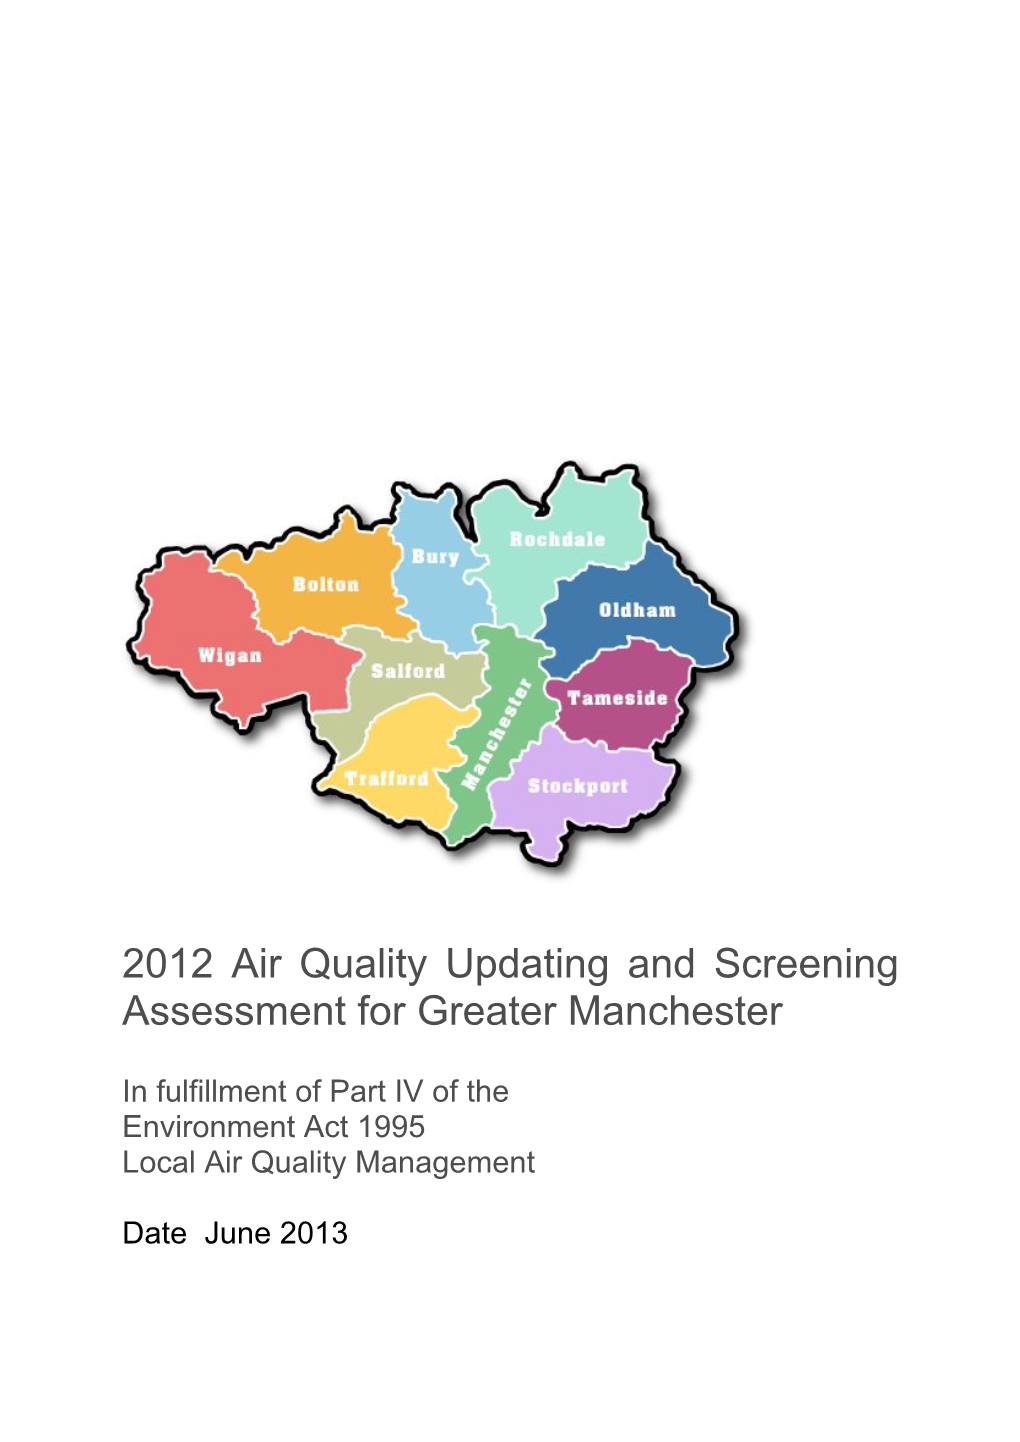 Updating and Screening Assessment for Greater Manchester